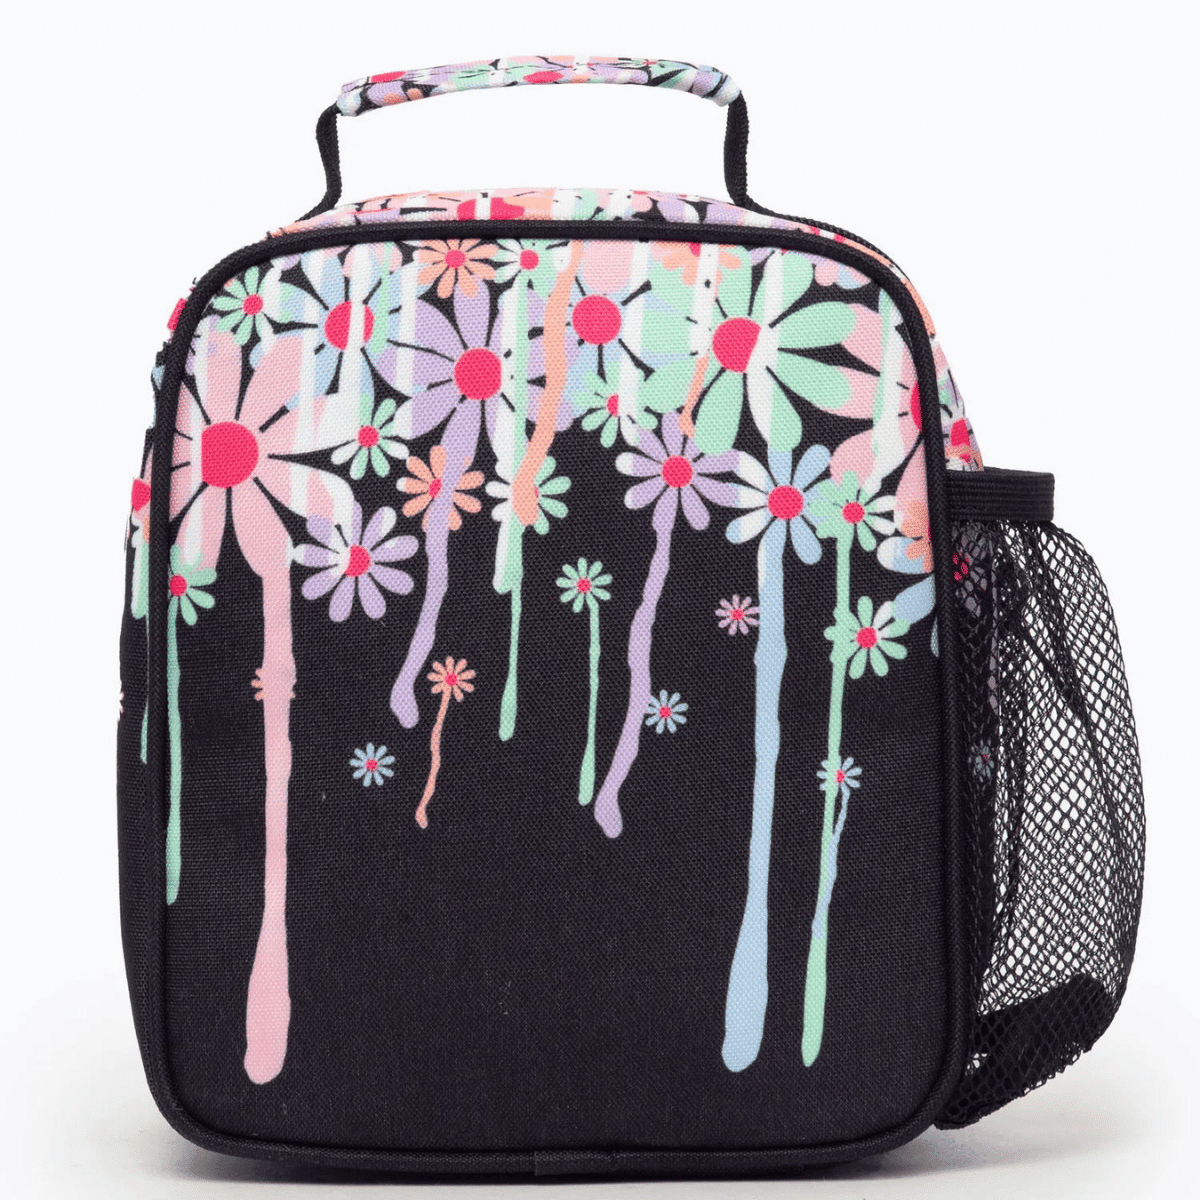 hype rucksack with daisy design back view